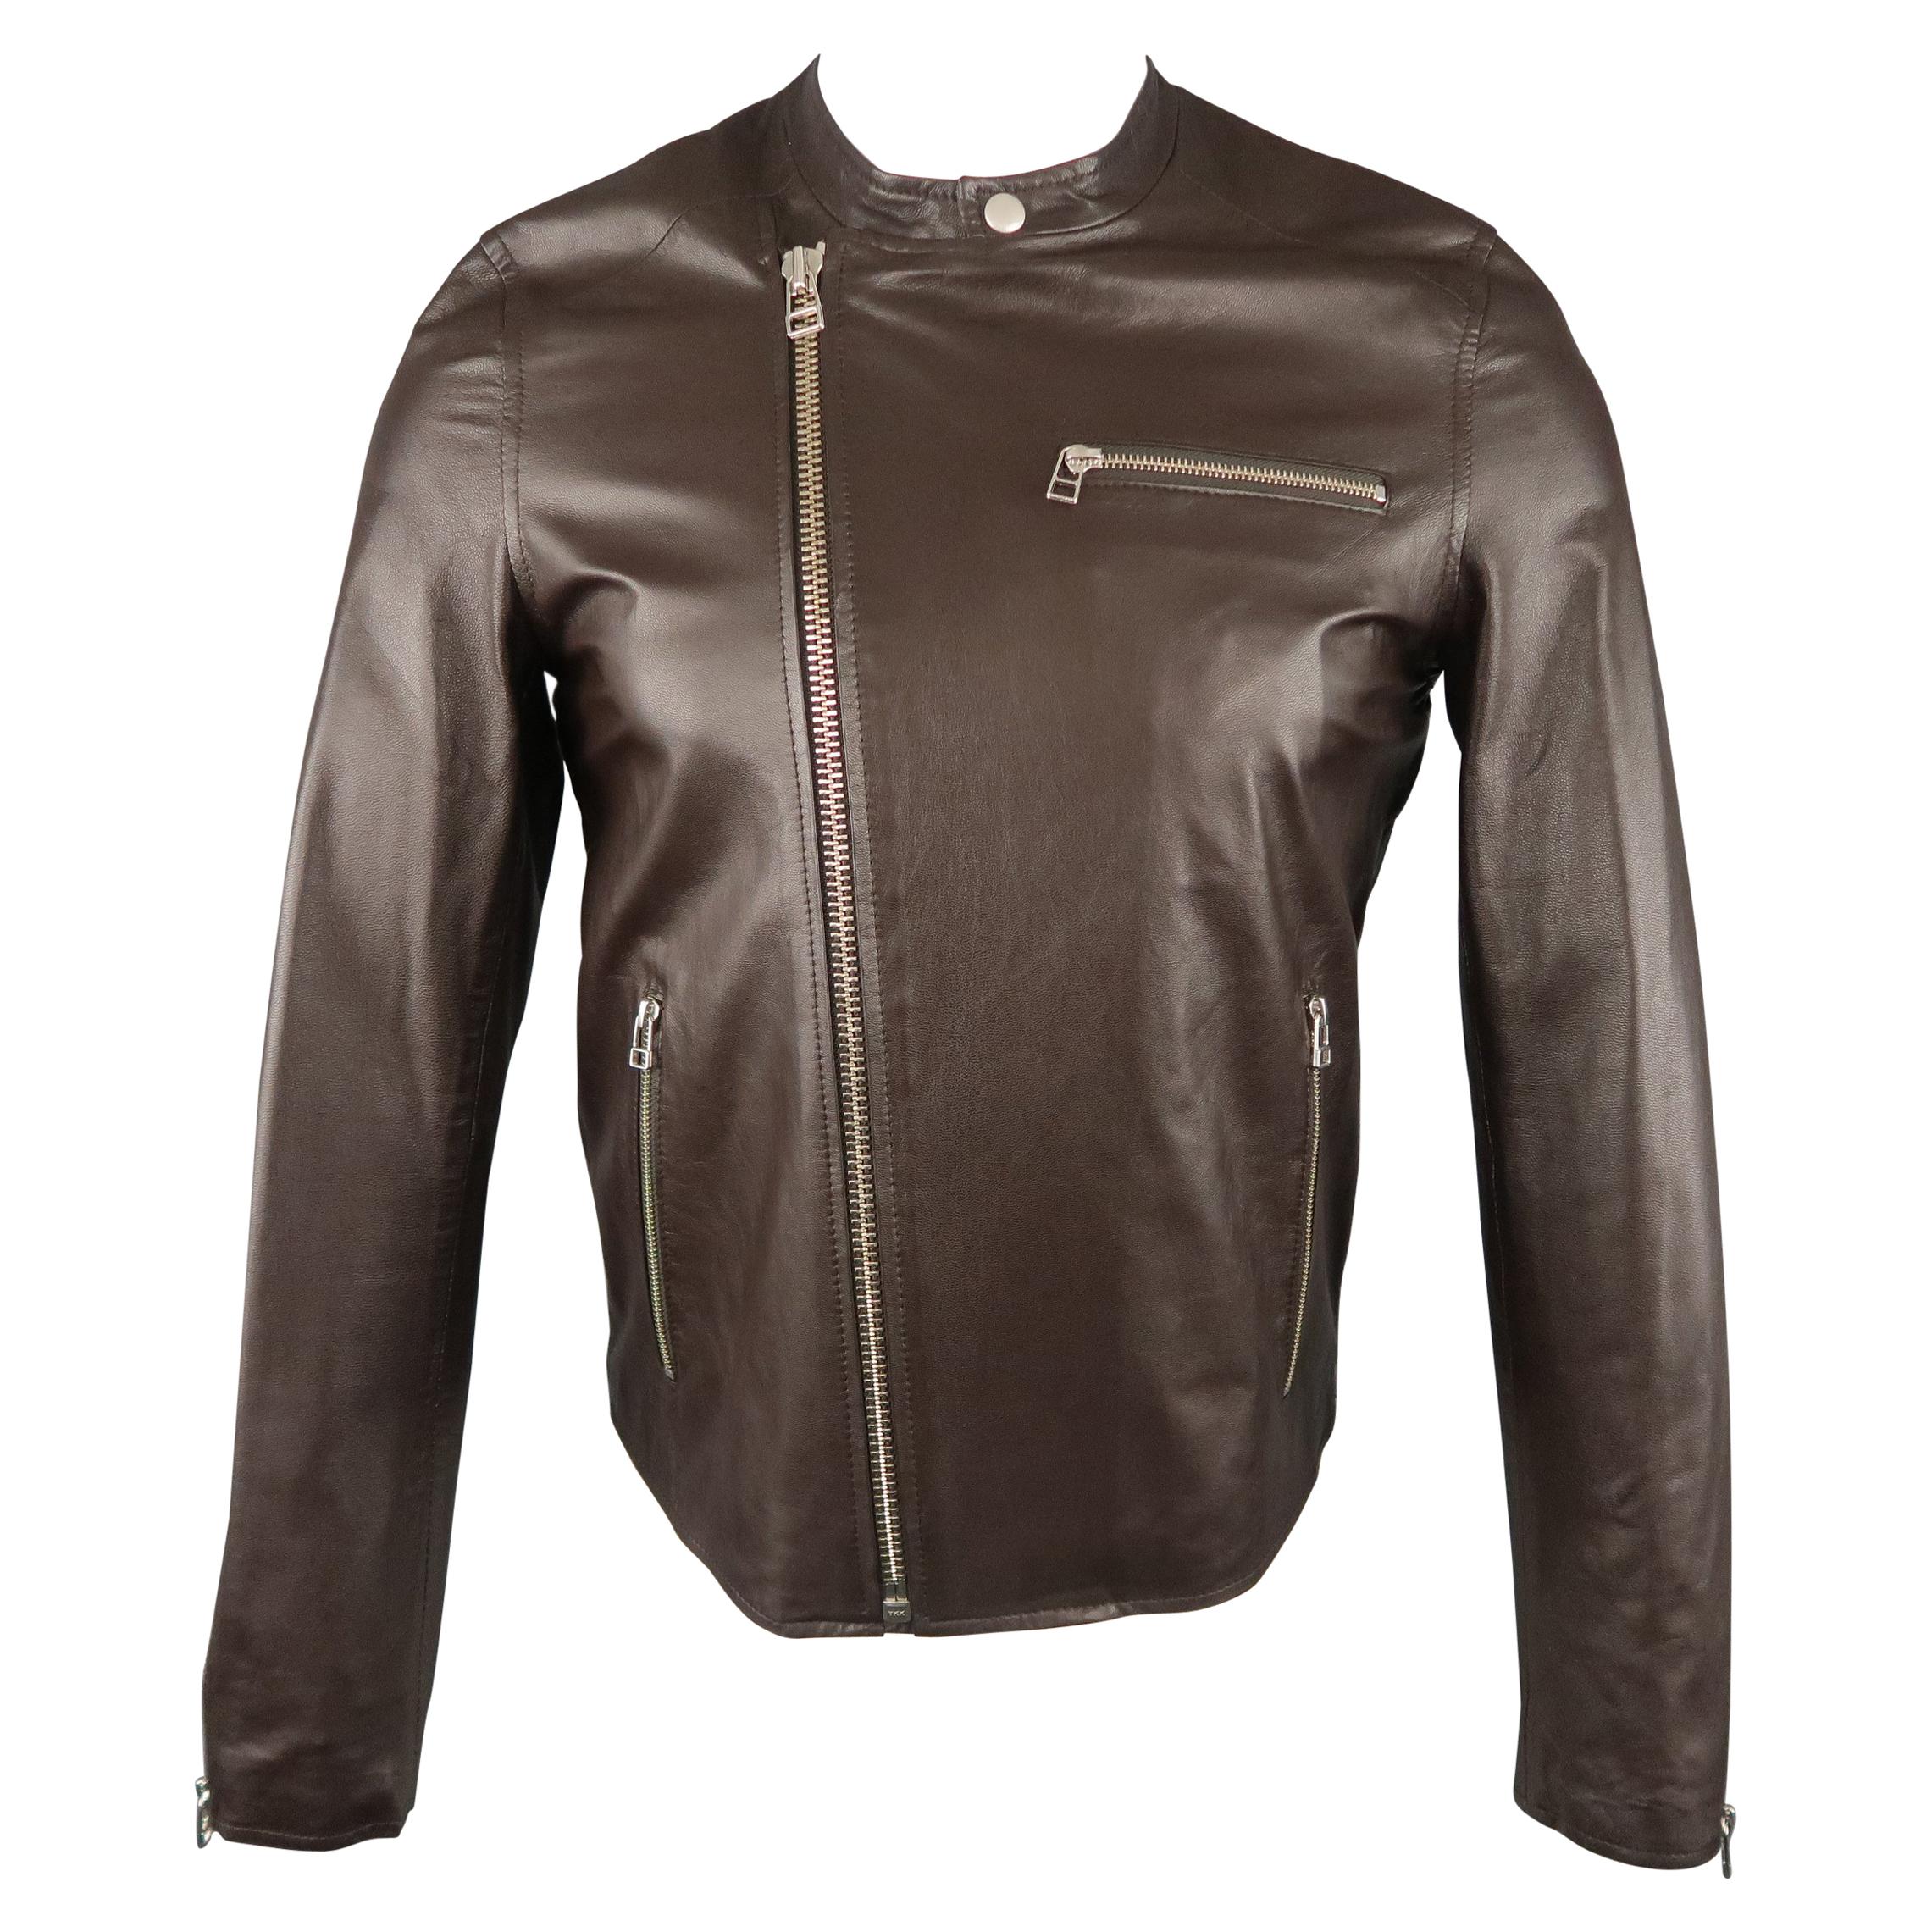 Men's SHIPLEY and HALMOS S Brown Leather Biker Jacket